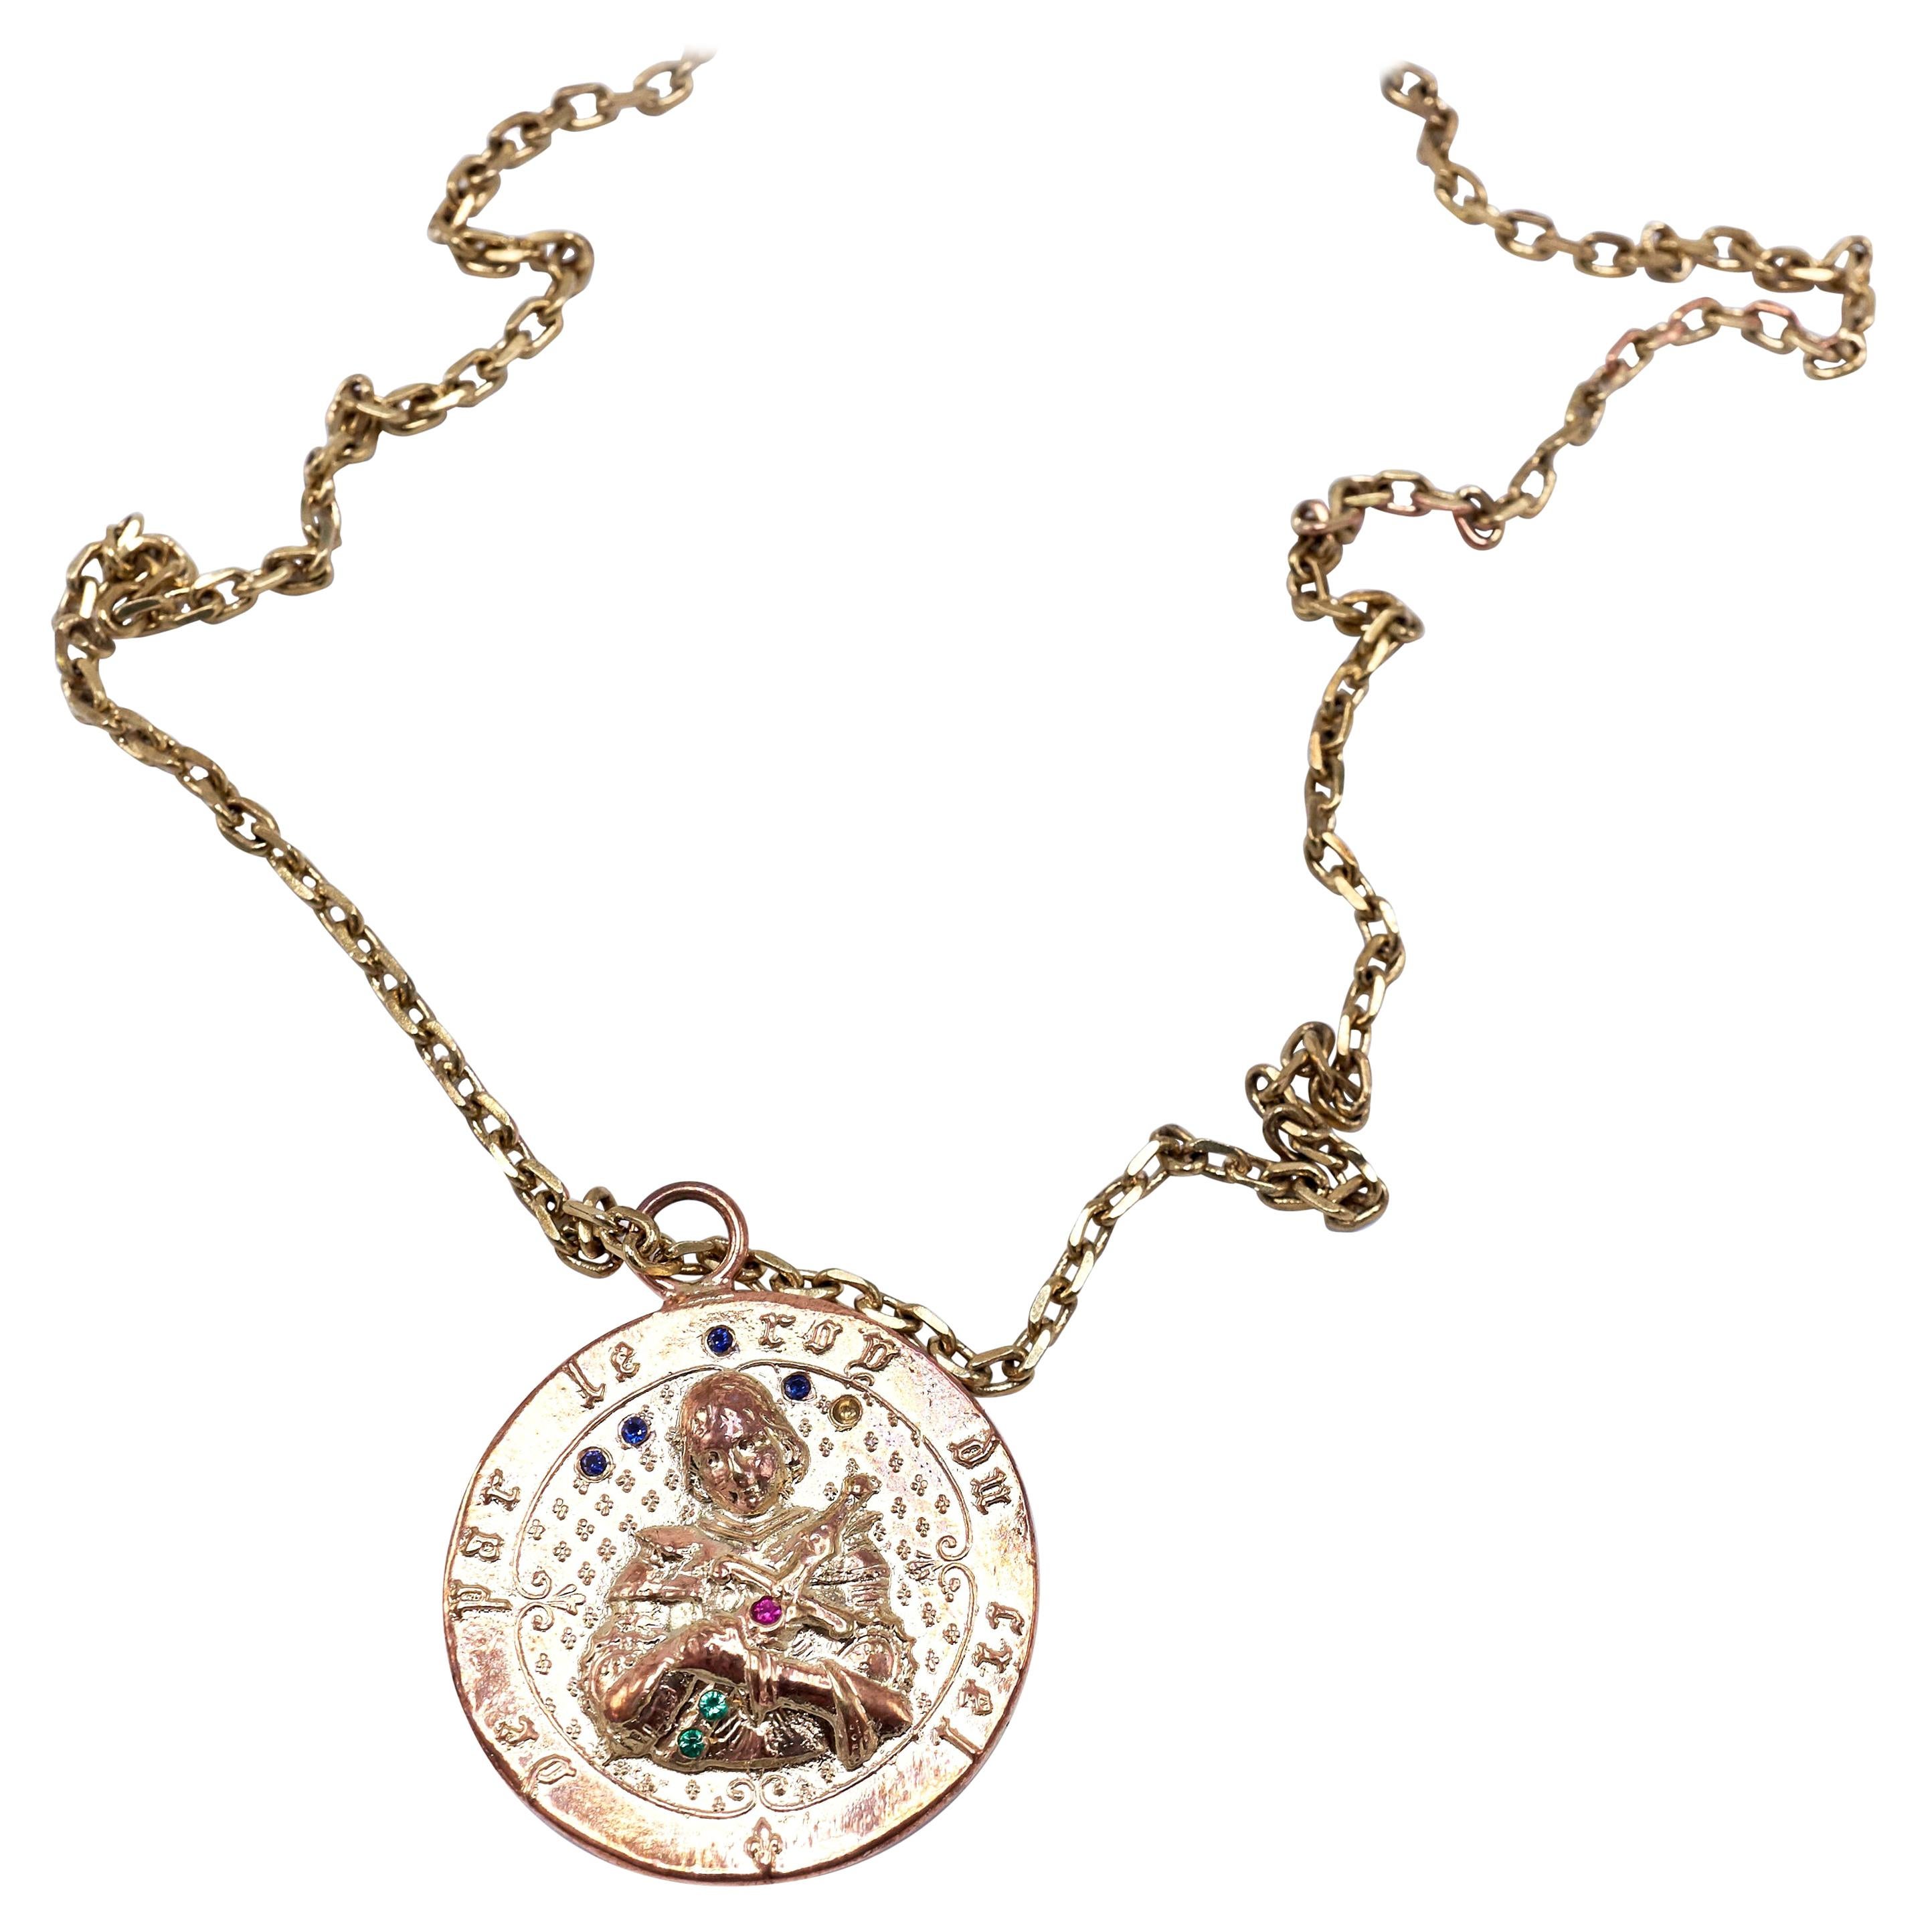 Joan of Arc Medal Necklace Ruby Emerald Blue Sapphire J DAUPHIN